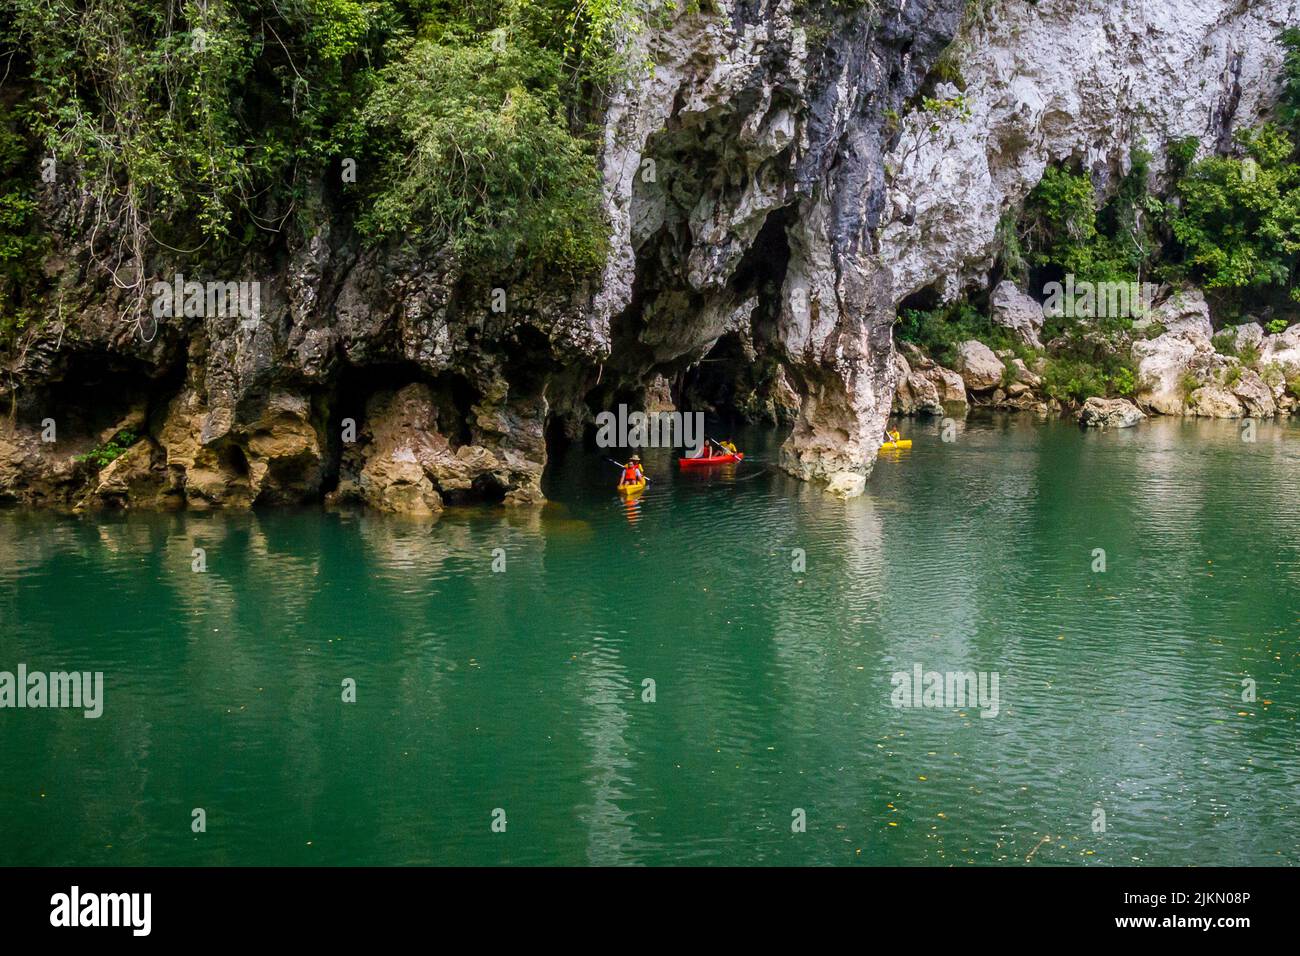 Severa kayakers near the entrance  of the famous Sohoton Cave in Basey, Samar island, Philippines Stock Photo